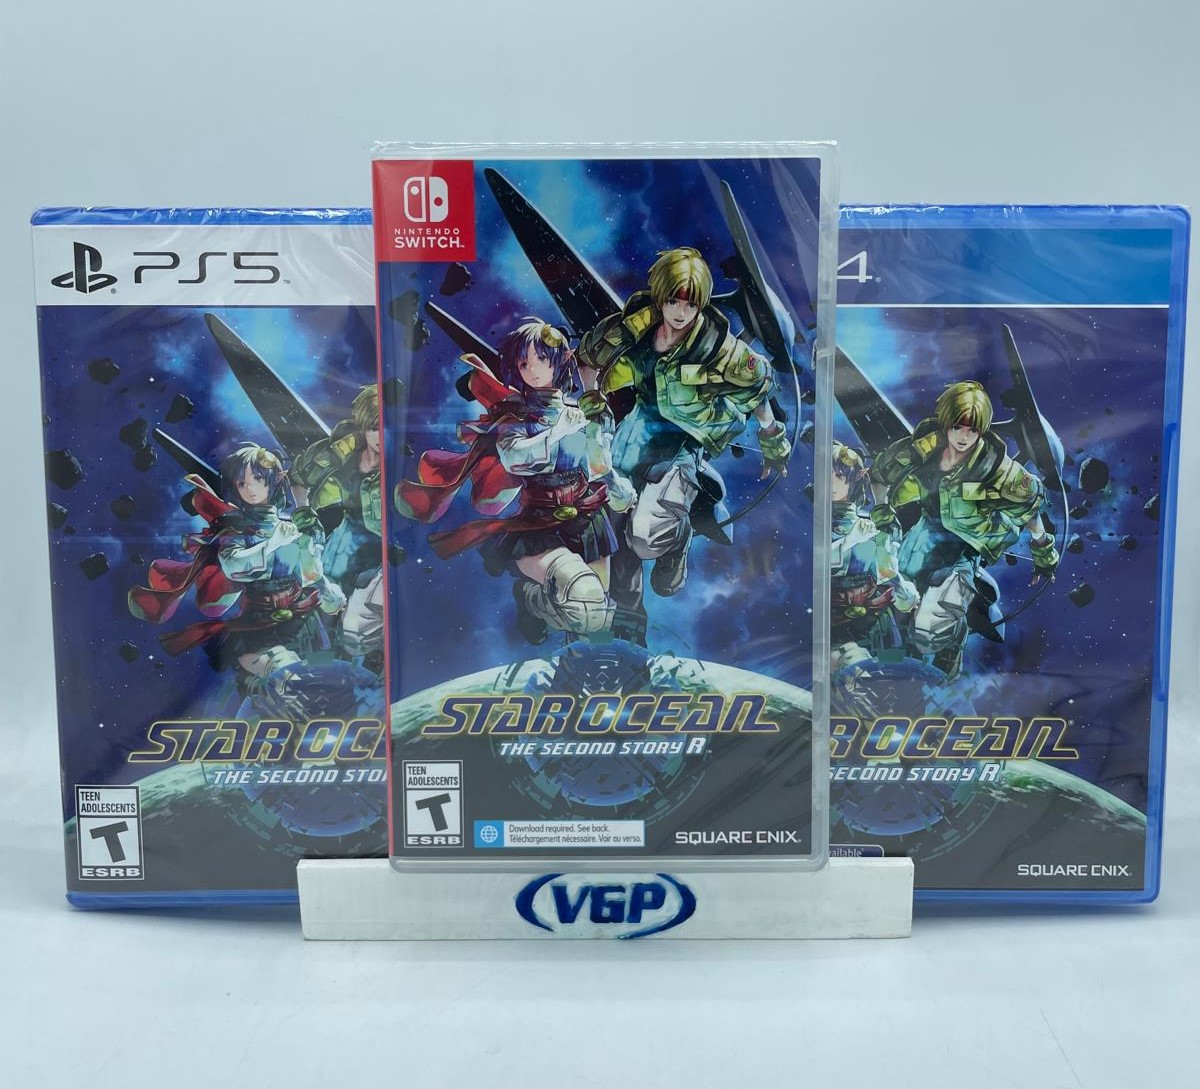 We're giving away a #videogame every day this week! #Monday to #Friday RT this post and Follow #VGP for a chance to win a copy of Star Ocean The Second Story R! Winner's choice #NSW, #PS5 or #PS4 The winner chosen tomorrow at 11 a.m. EST #StarOcean #NintendoSwitch